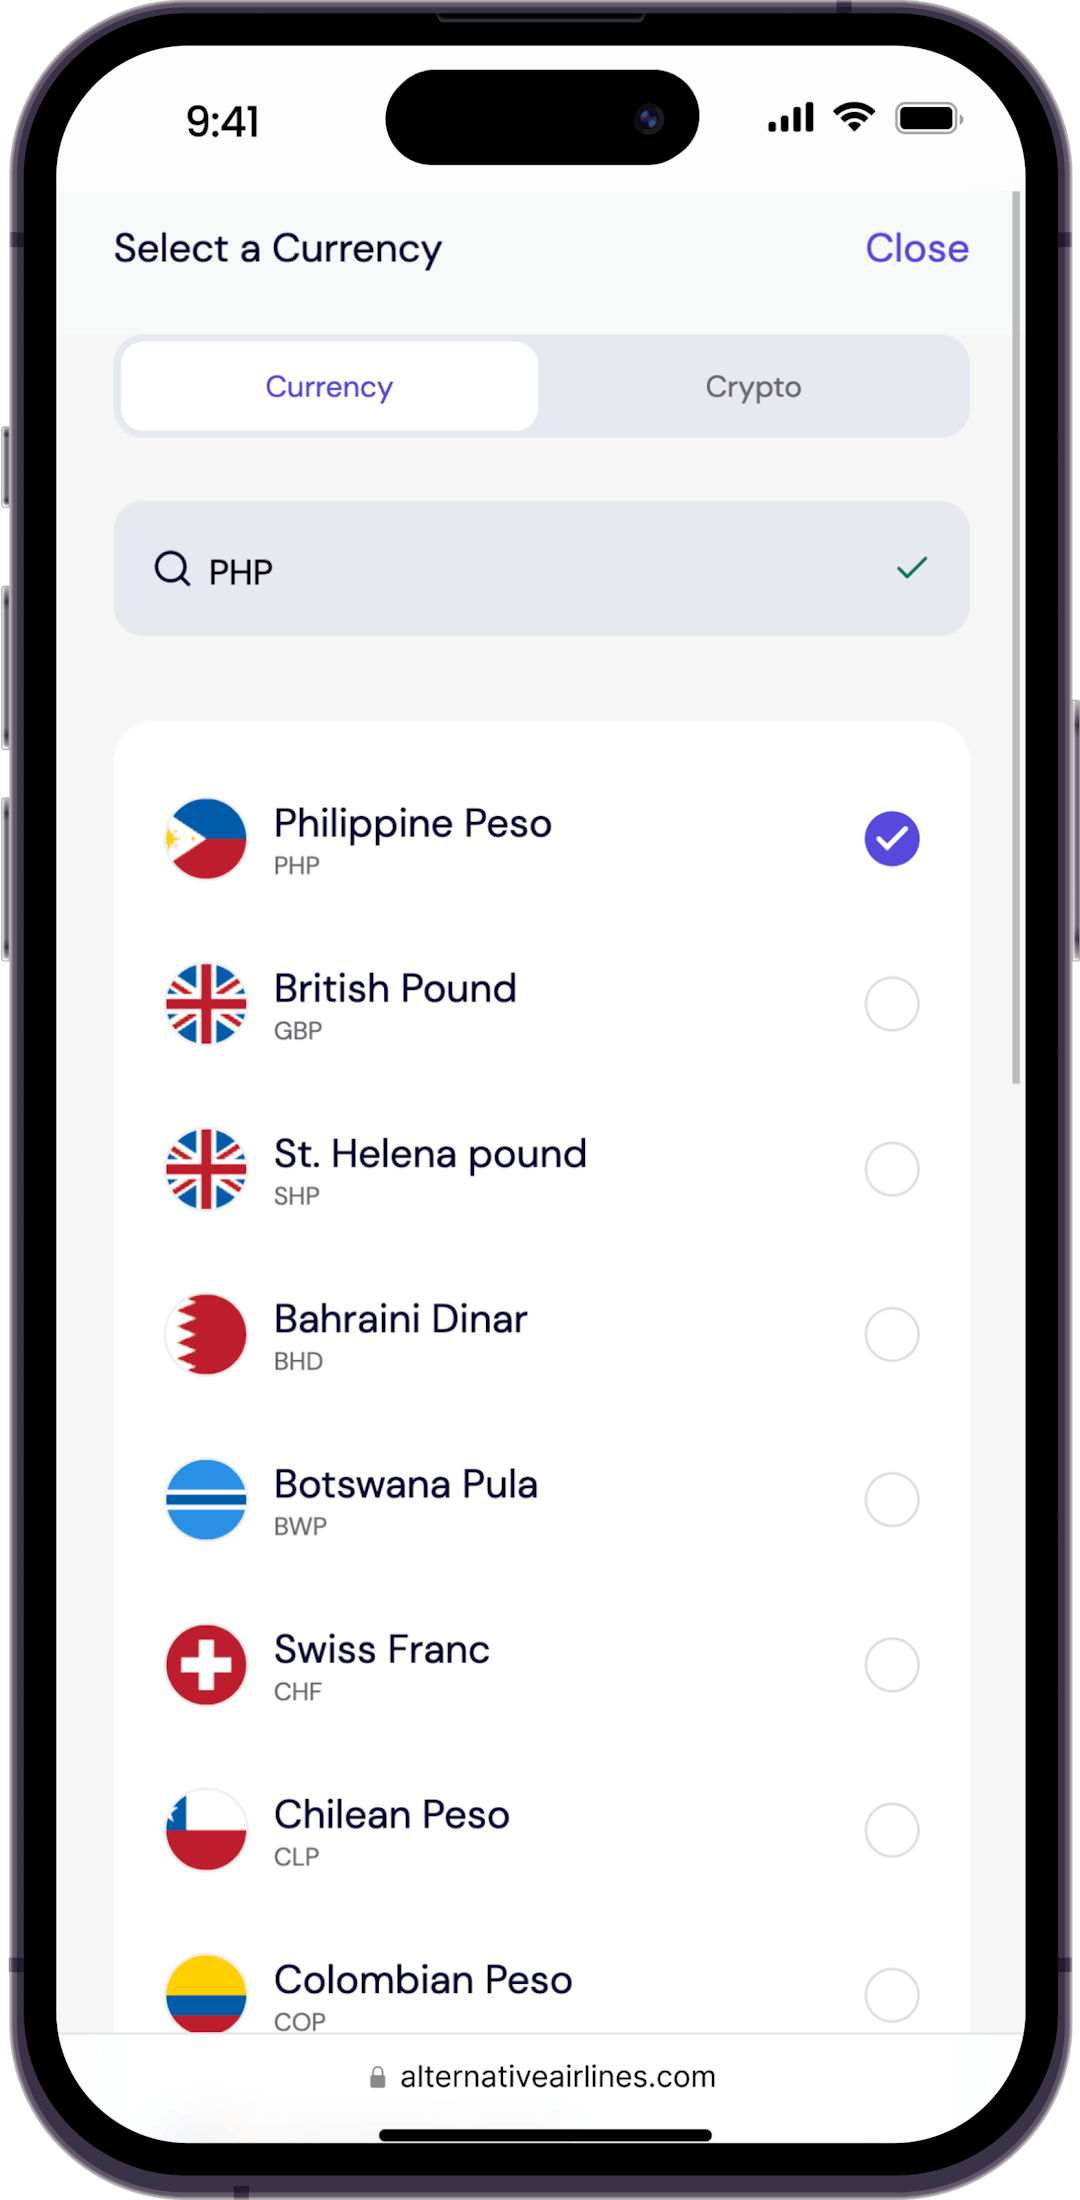 Step 3 - type 'PHP' to search for flights in Philippine peso